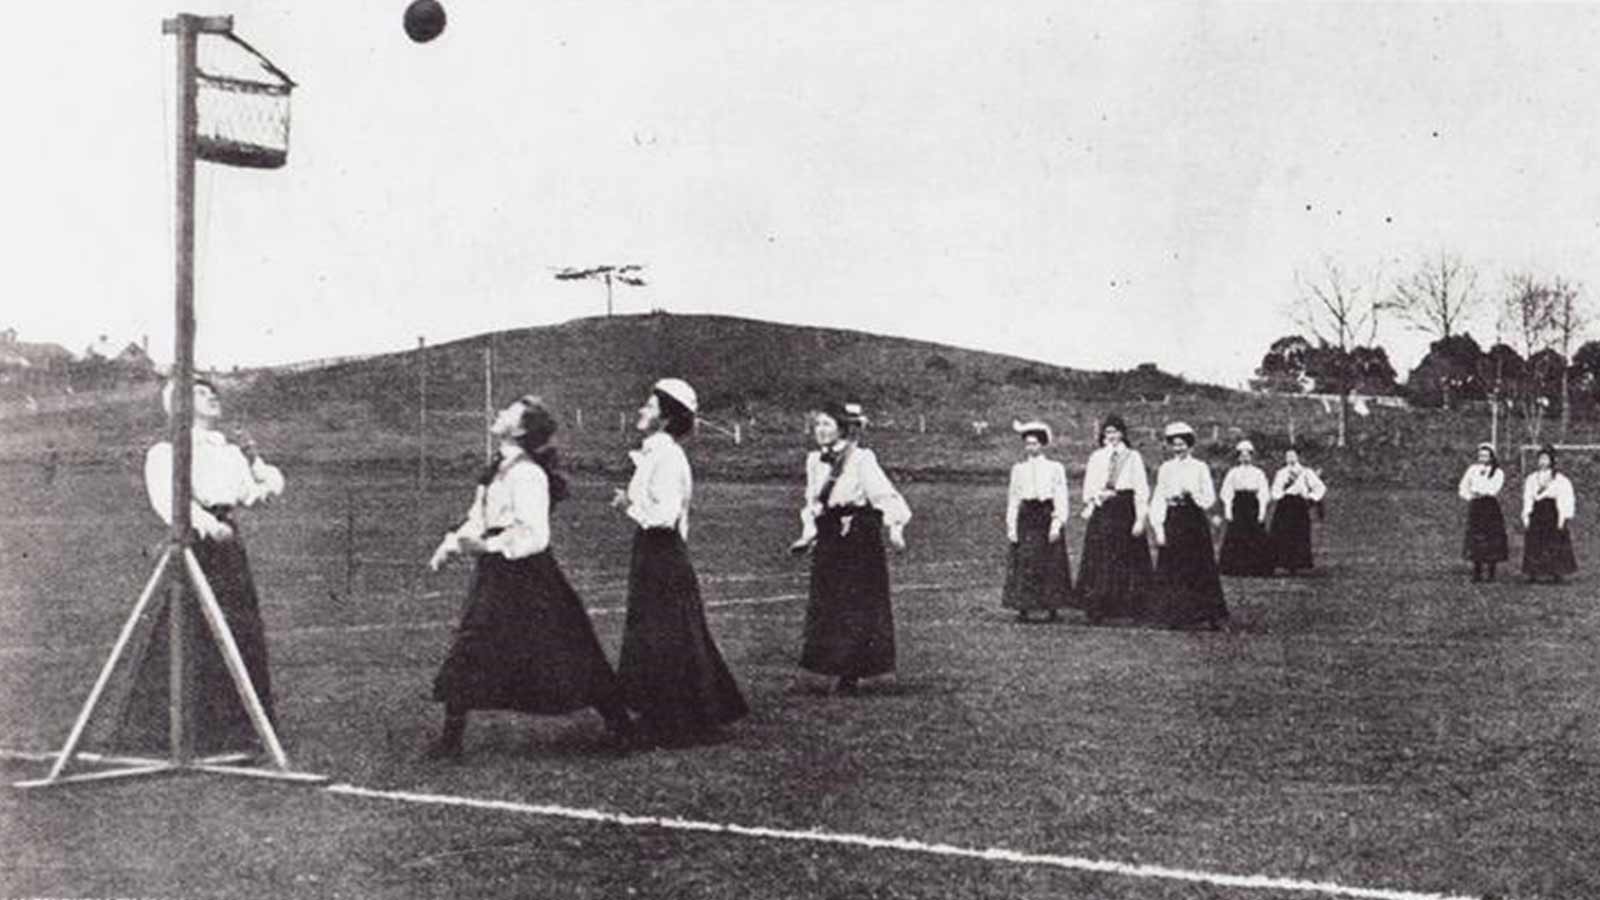 Within the late 19th and early 20th century, "women's outdoor basketball" gained popularity across the British Empire.